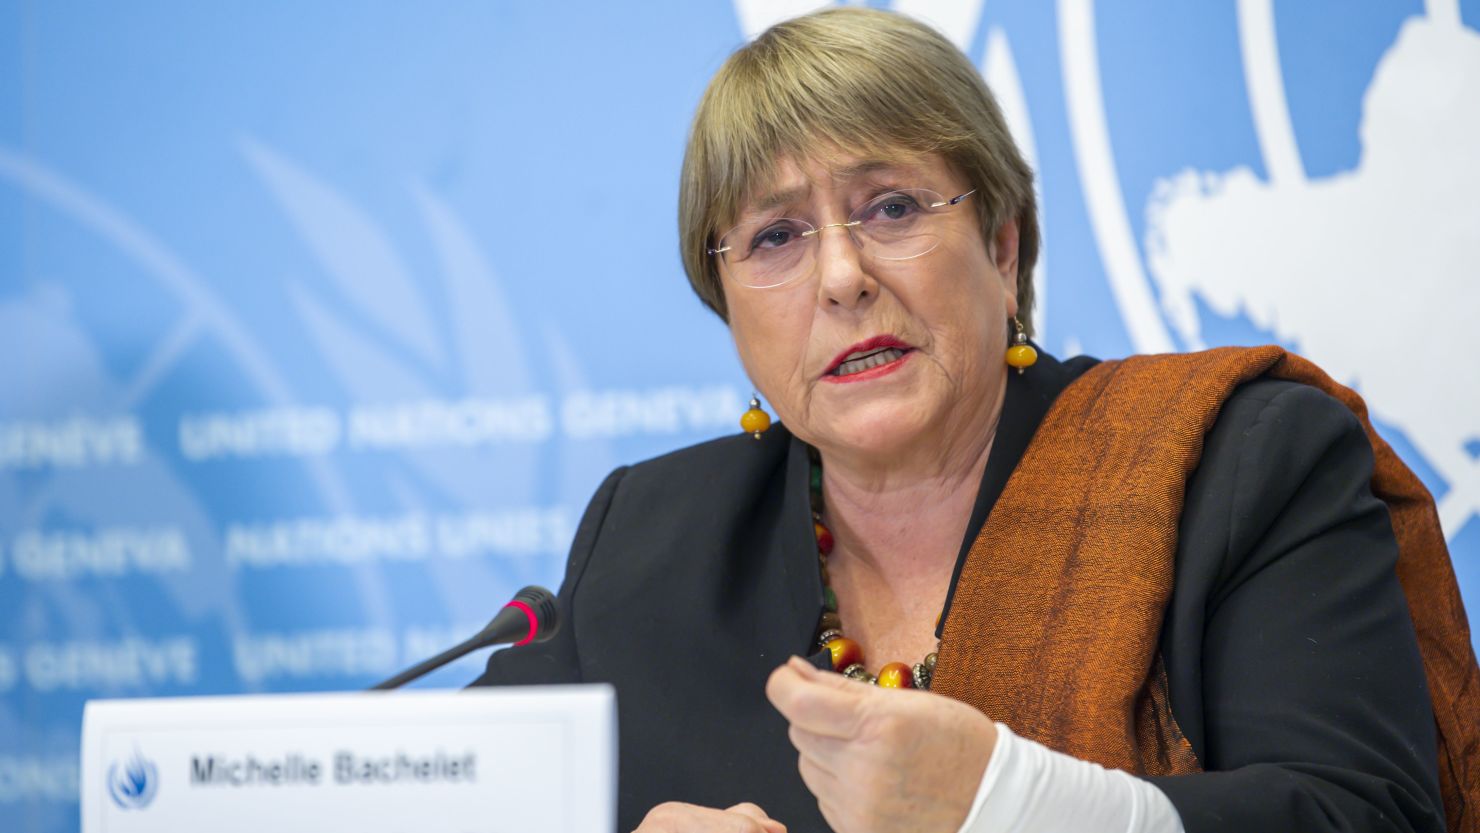 UN High Commissioner for Human Rights Michelle Bachelet in Geneva, Switzerland, on November 3, 2021.